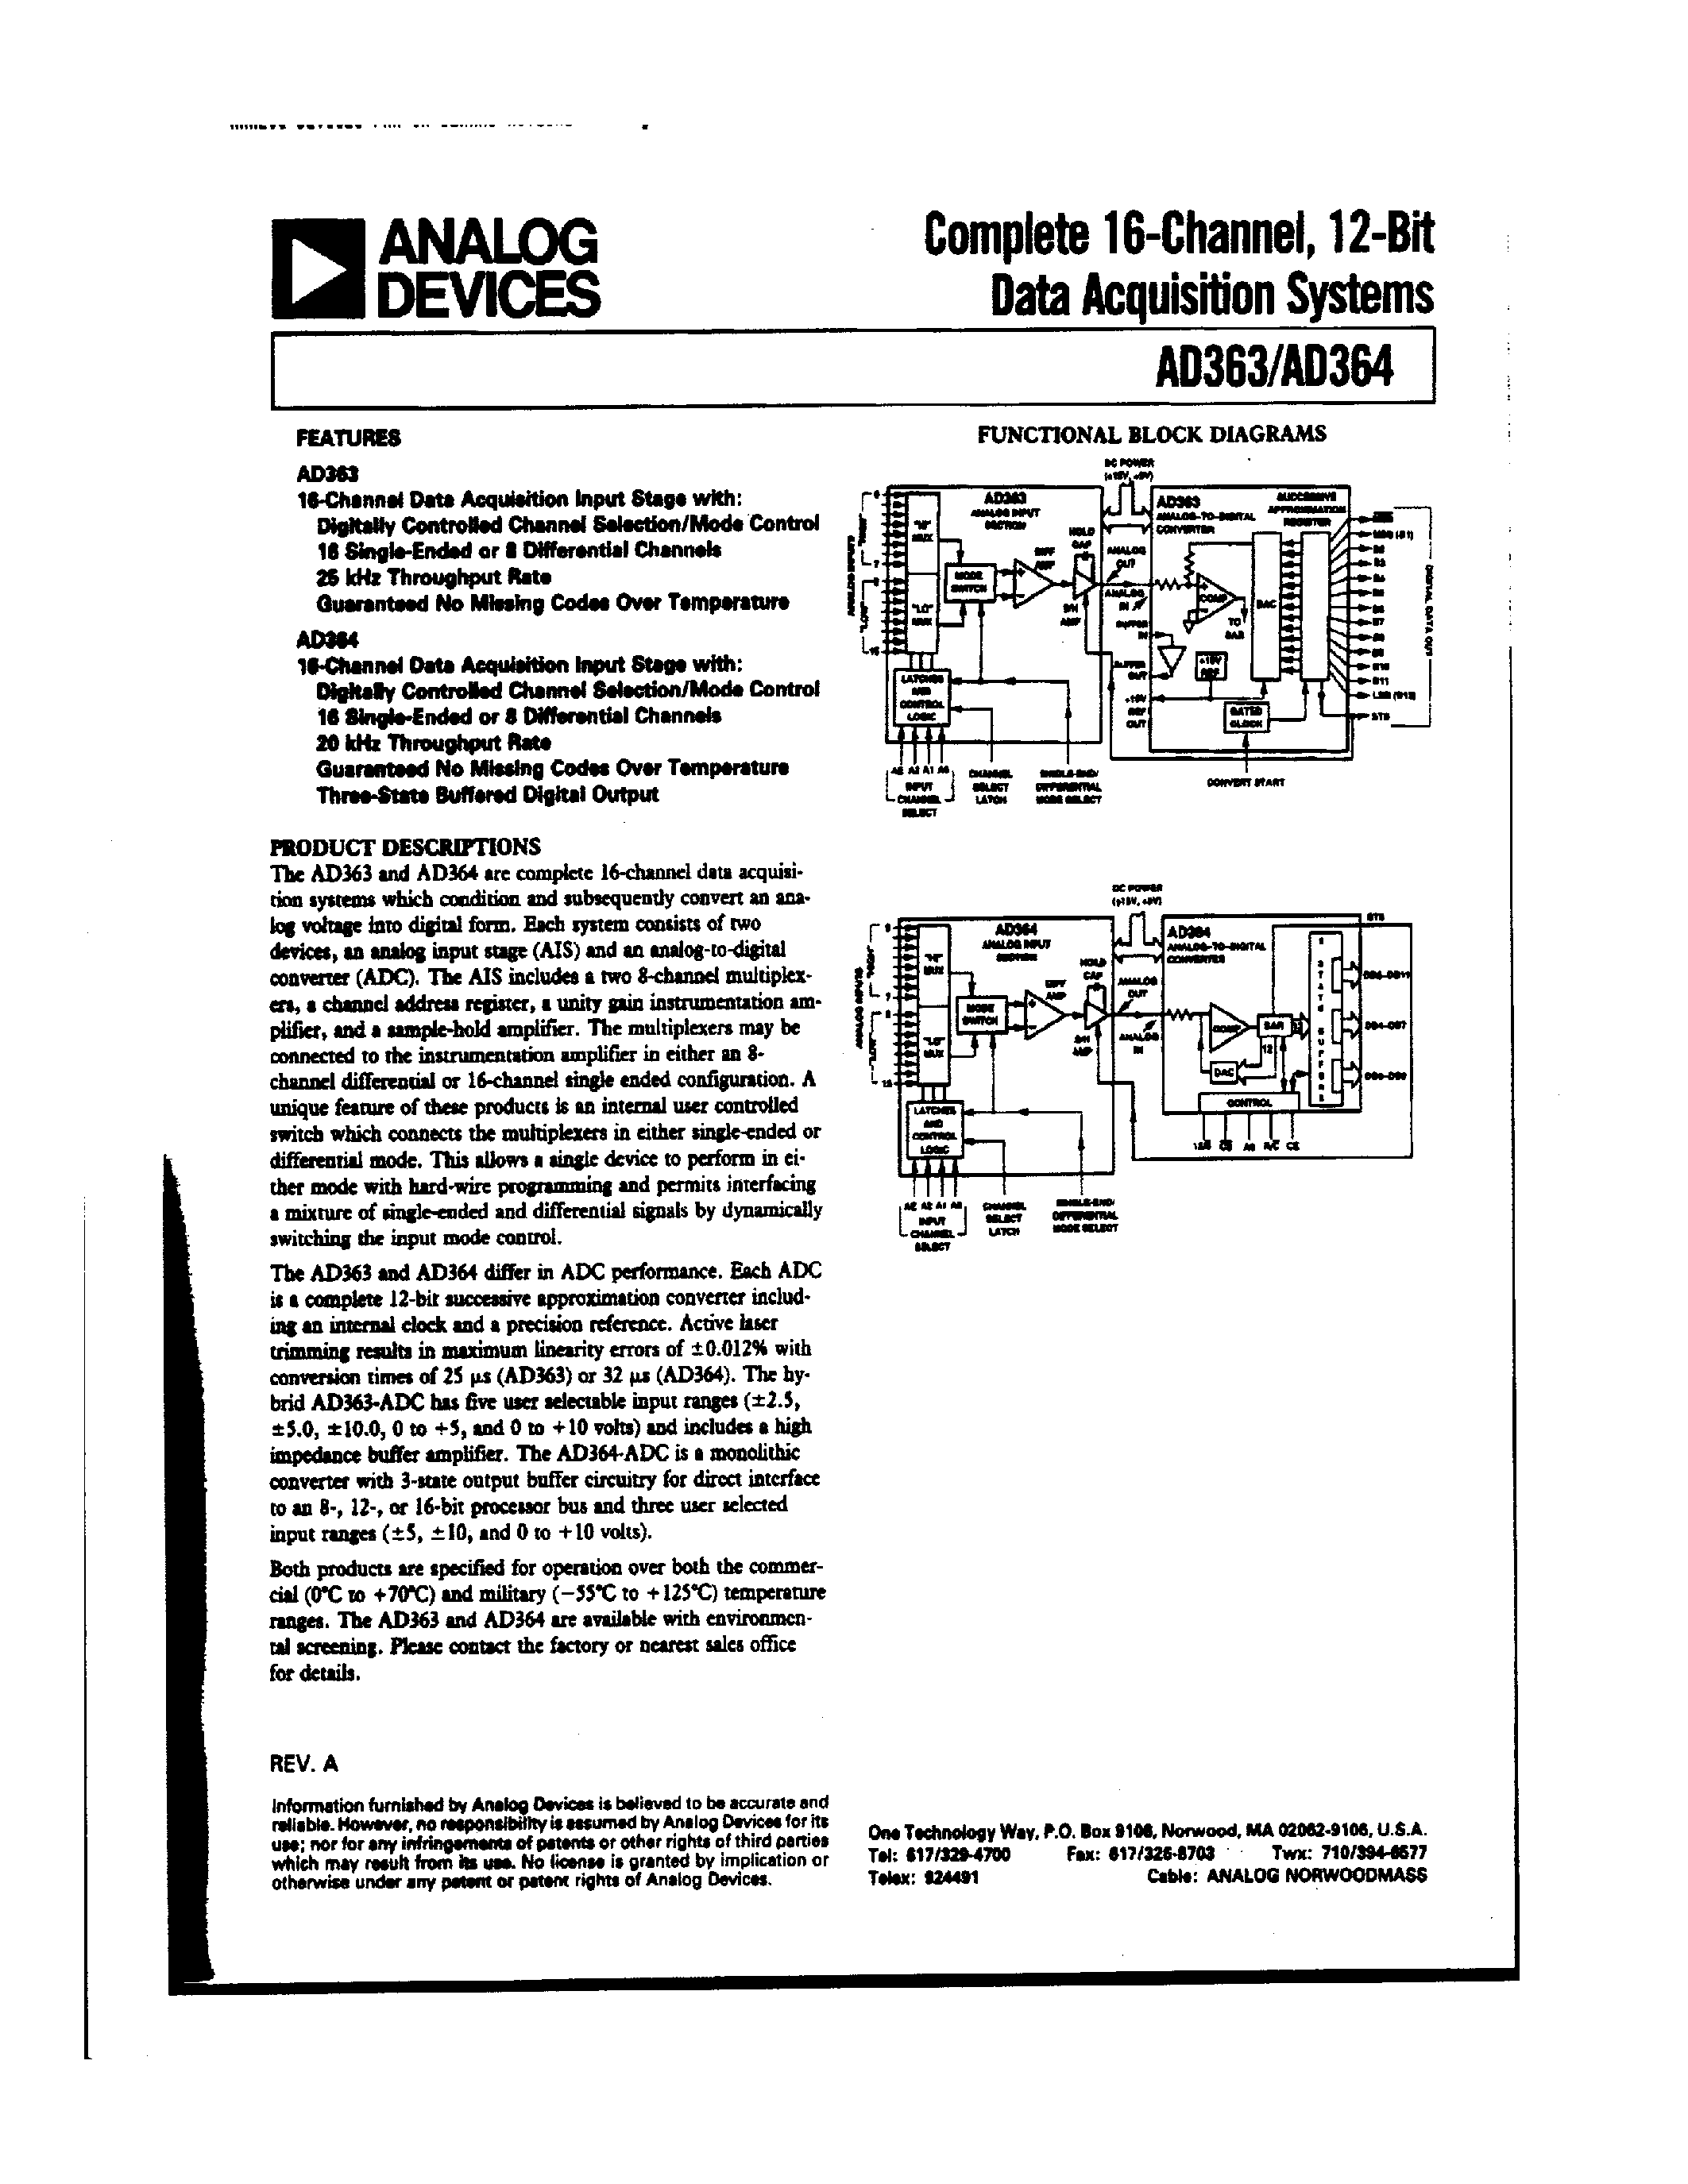 Datasheet AD364RJD - Complete 16-Channel/12-Bit Data Acquisition System page 1